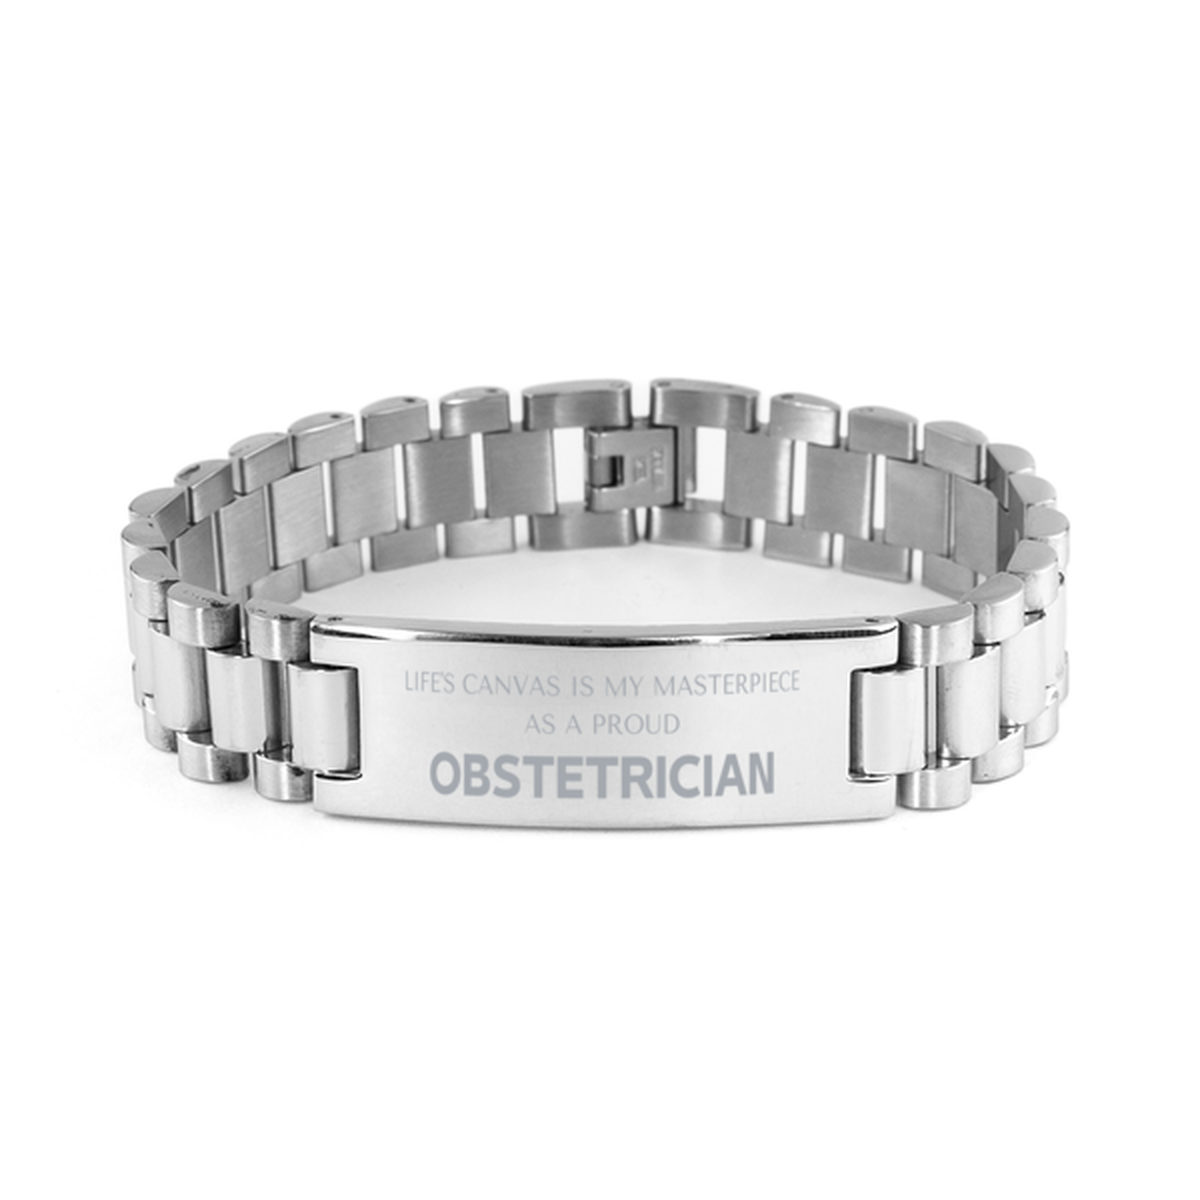 Proud Obstetrician Gifts, Life's canvas is my masterpiece, Epic Birthday Christmas Unique Ladder Stainless Steel Bracelet For Obstetrician, Coworkers, Men, Women, Friends